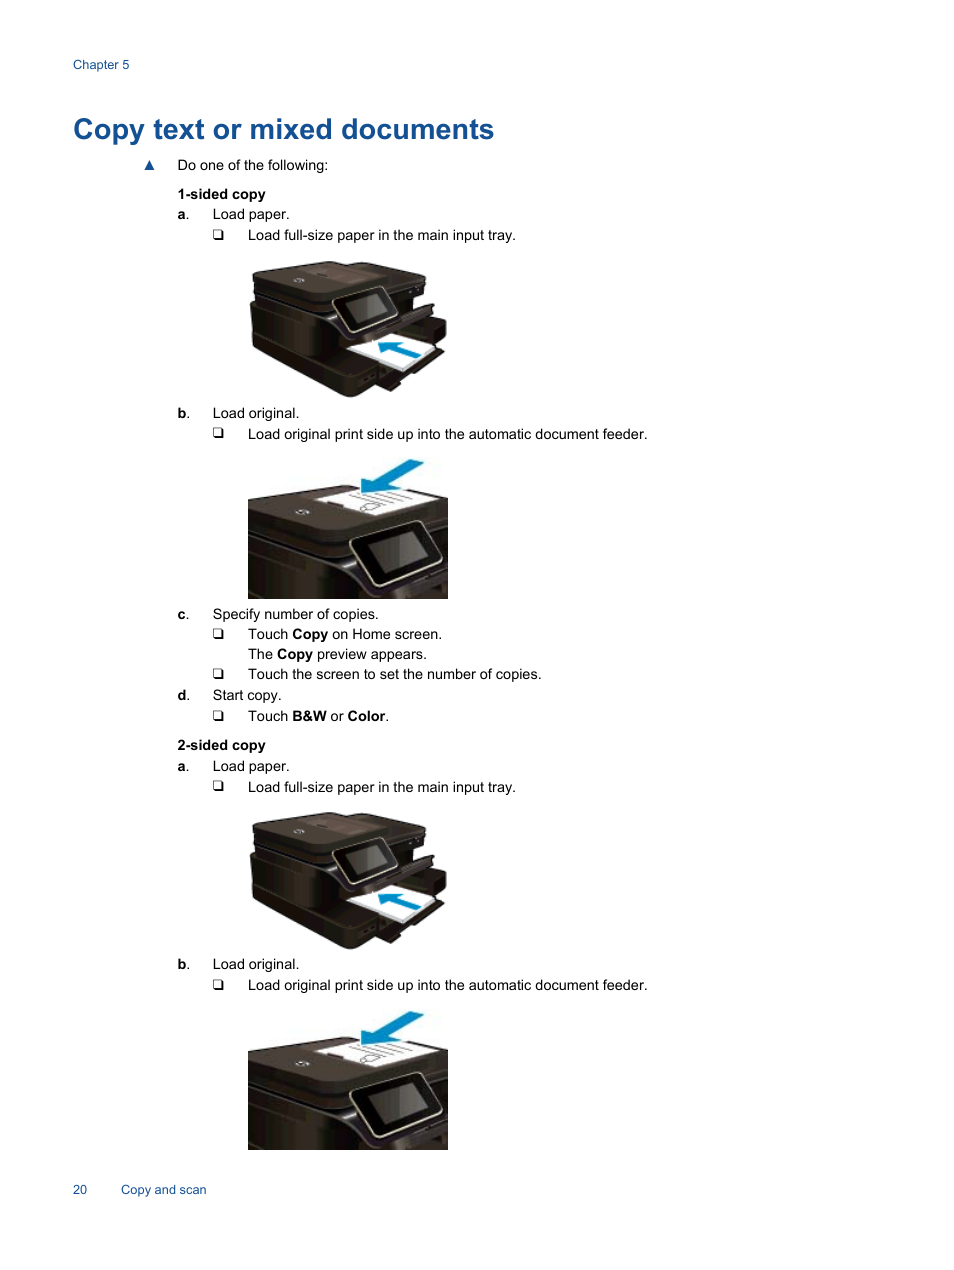 Copy text or mixed documents | HP Photosmart 7520 e-All-in-One Printer User  Manual | Page 22 / 102